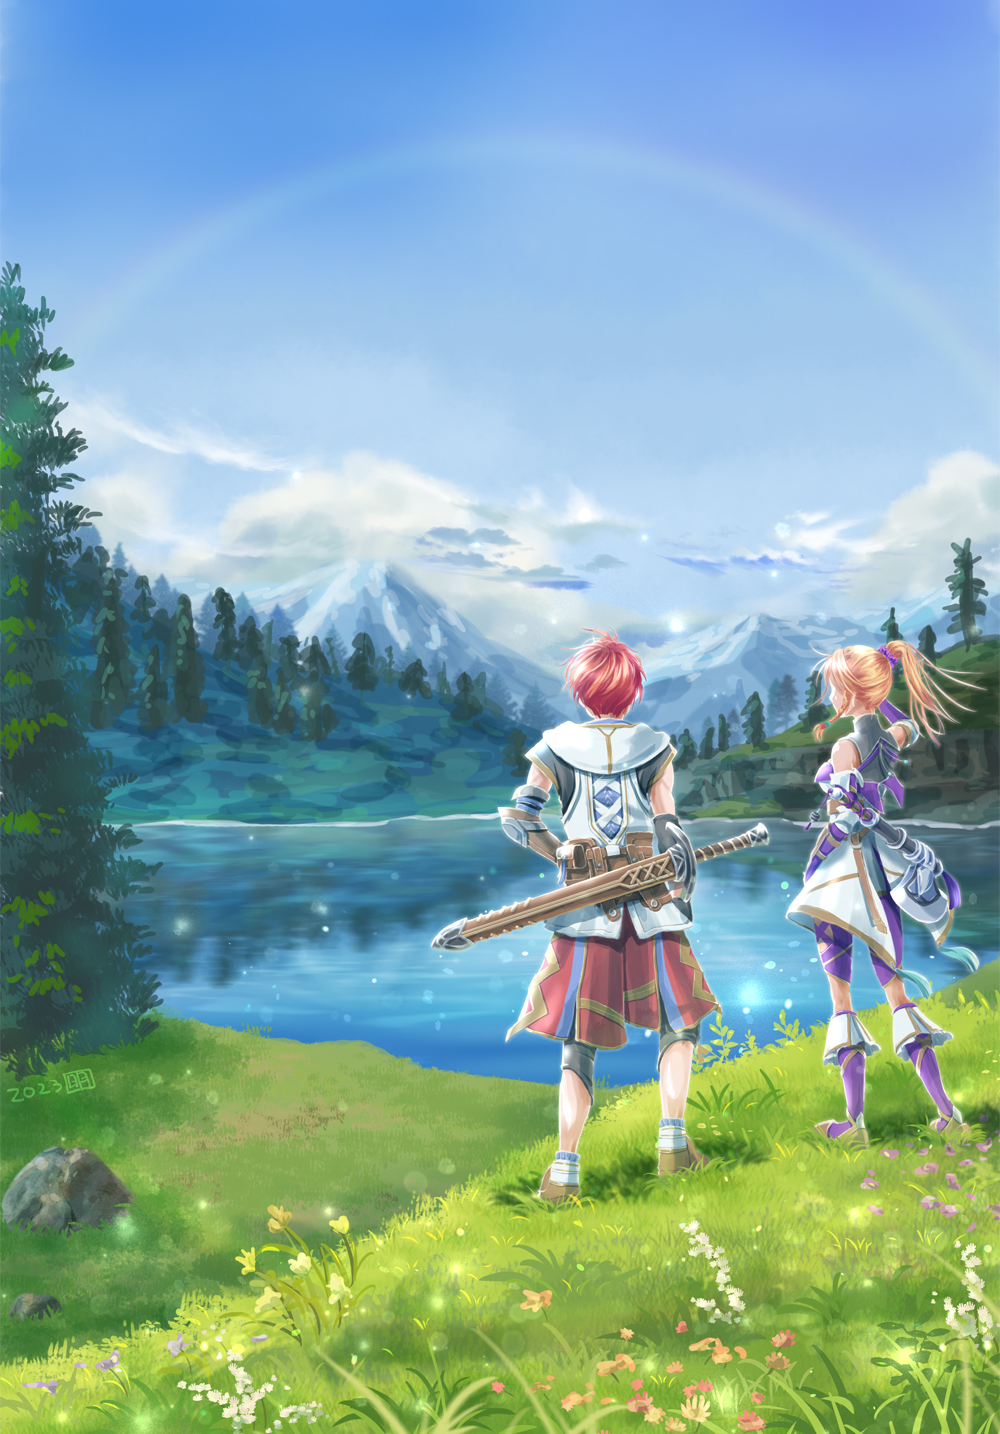 1boy 1girl adol_christin ake_miyamura axe blonde_hair blue_sky clouds commentary_request full_body high_ponytail highres karja_balta mountain on_grass outdoors pond rainbow redhead rock scenery short_hair sky standing sword sword_on_back tree water weapon weapon_on_back ys ys_x_nordics